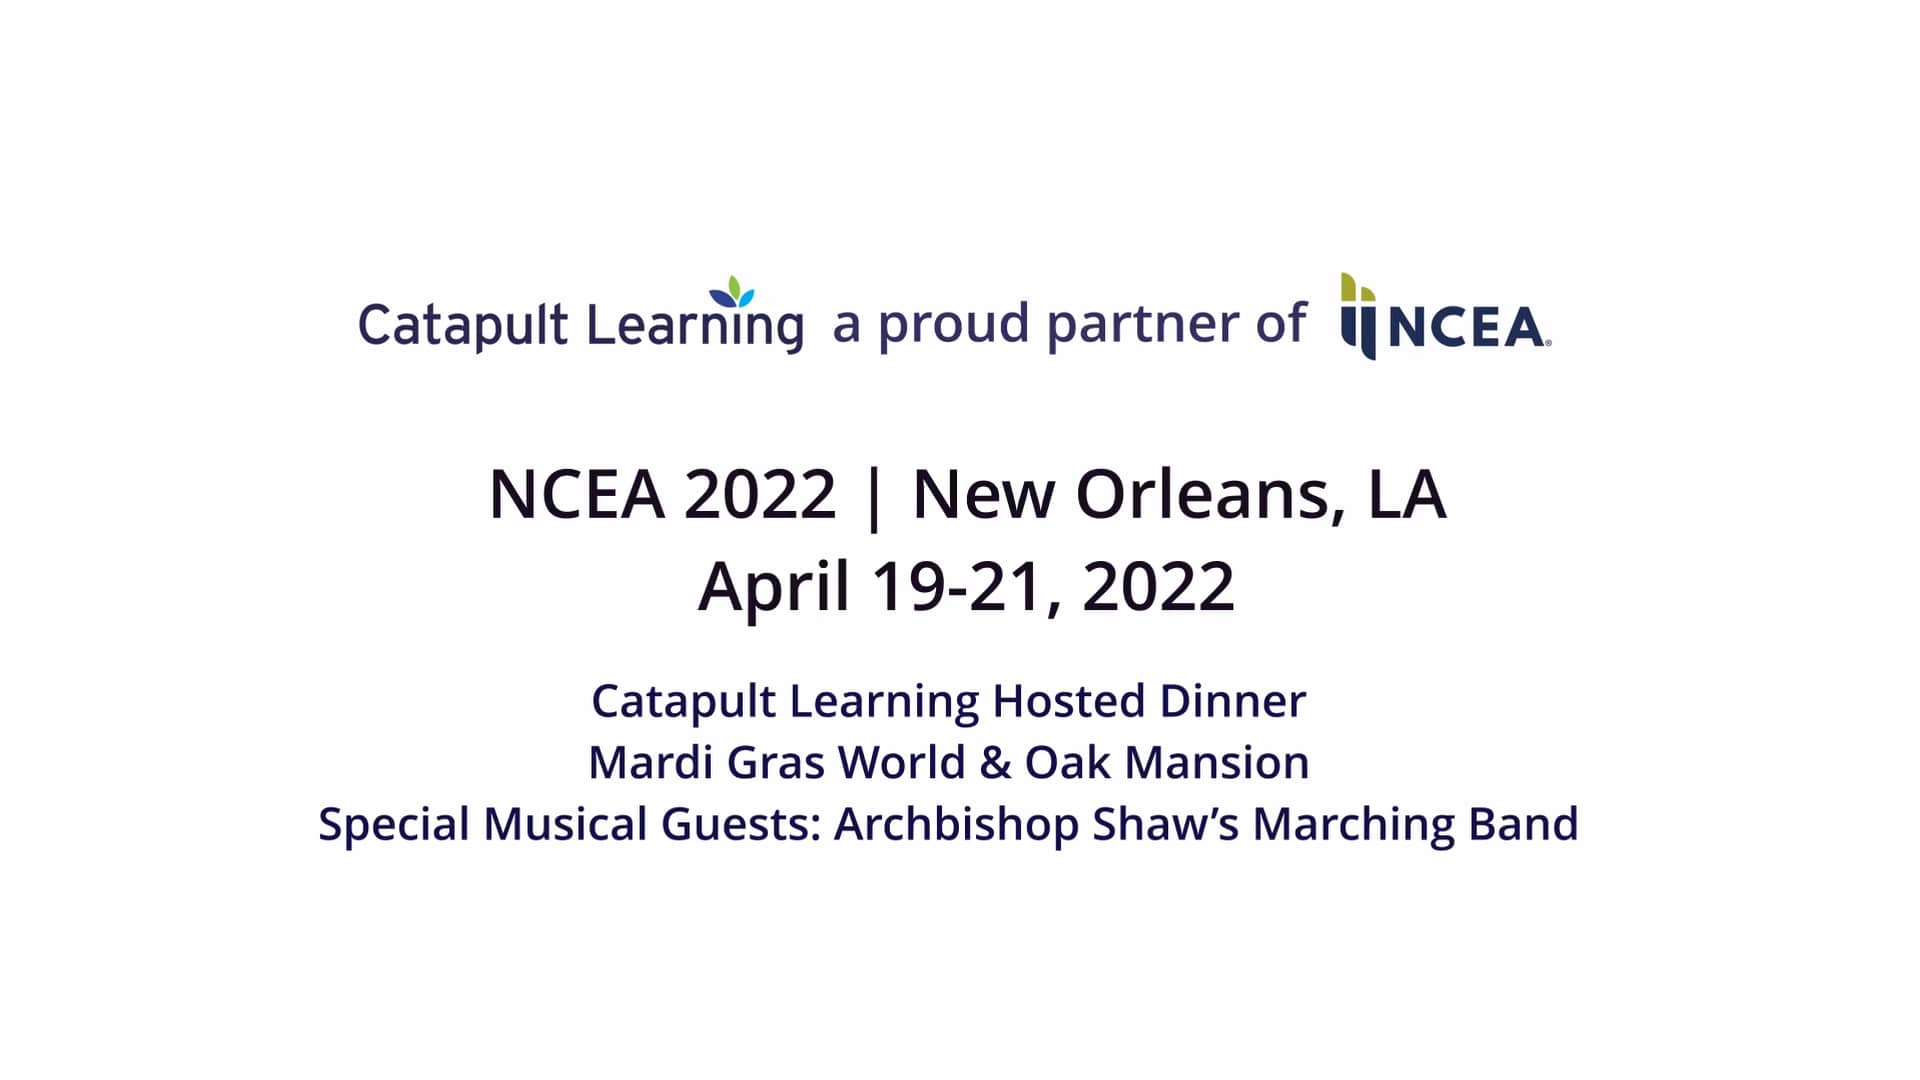 NCEA Conference New Orleans 2022 on Vimeo